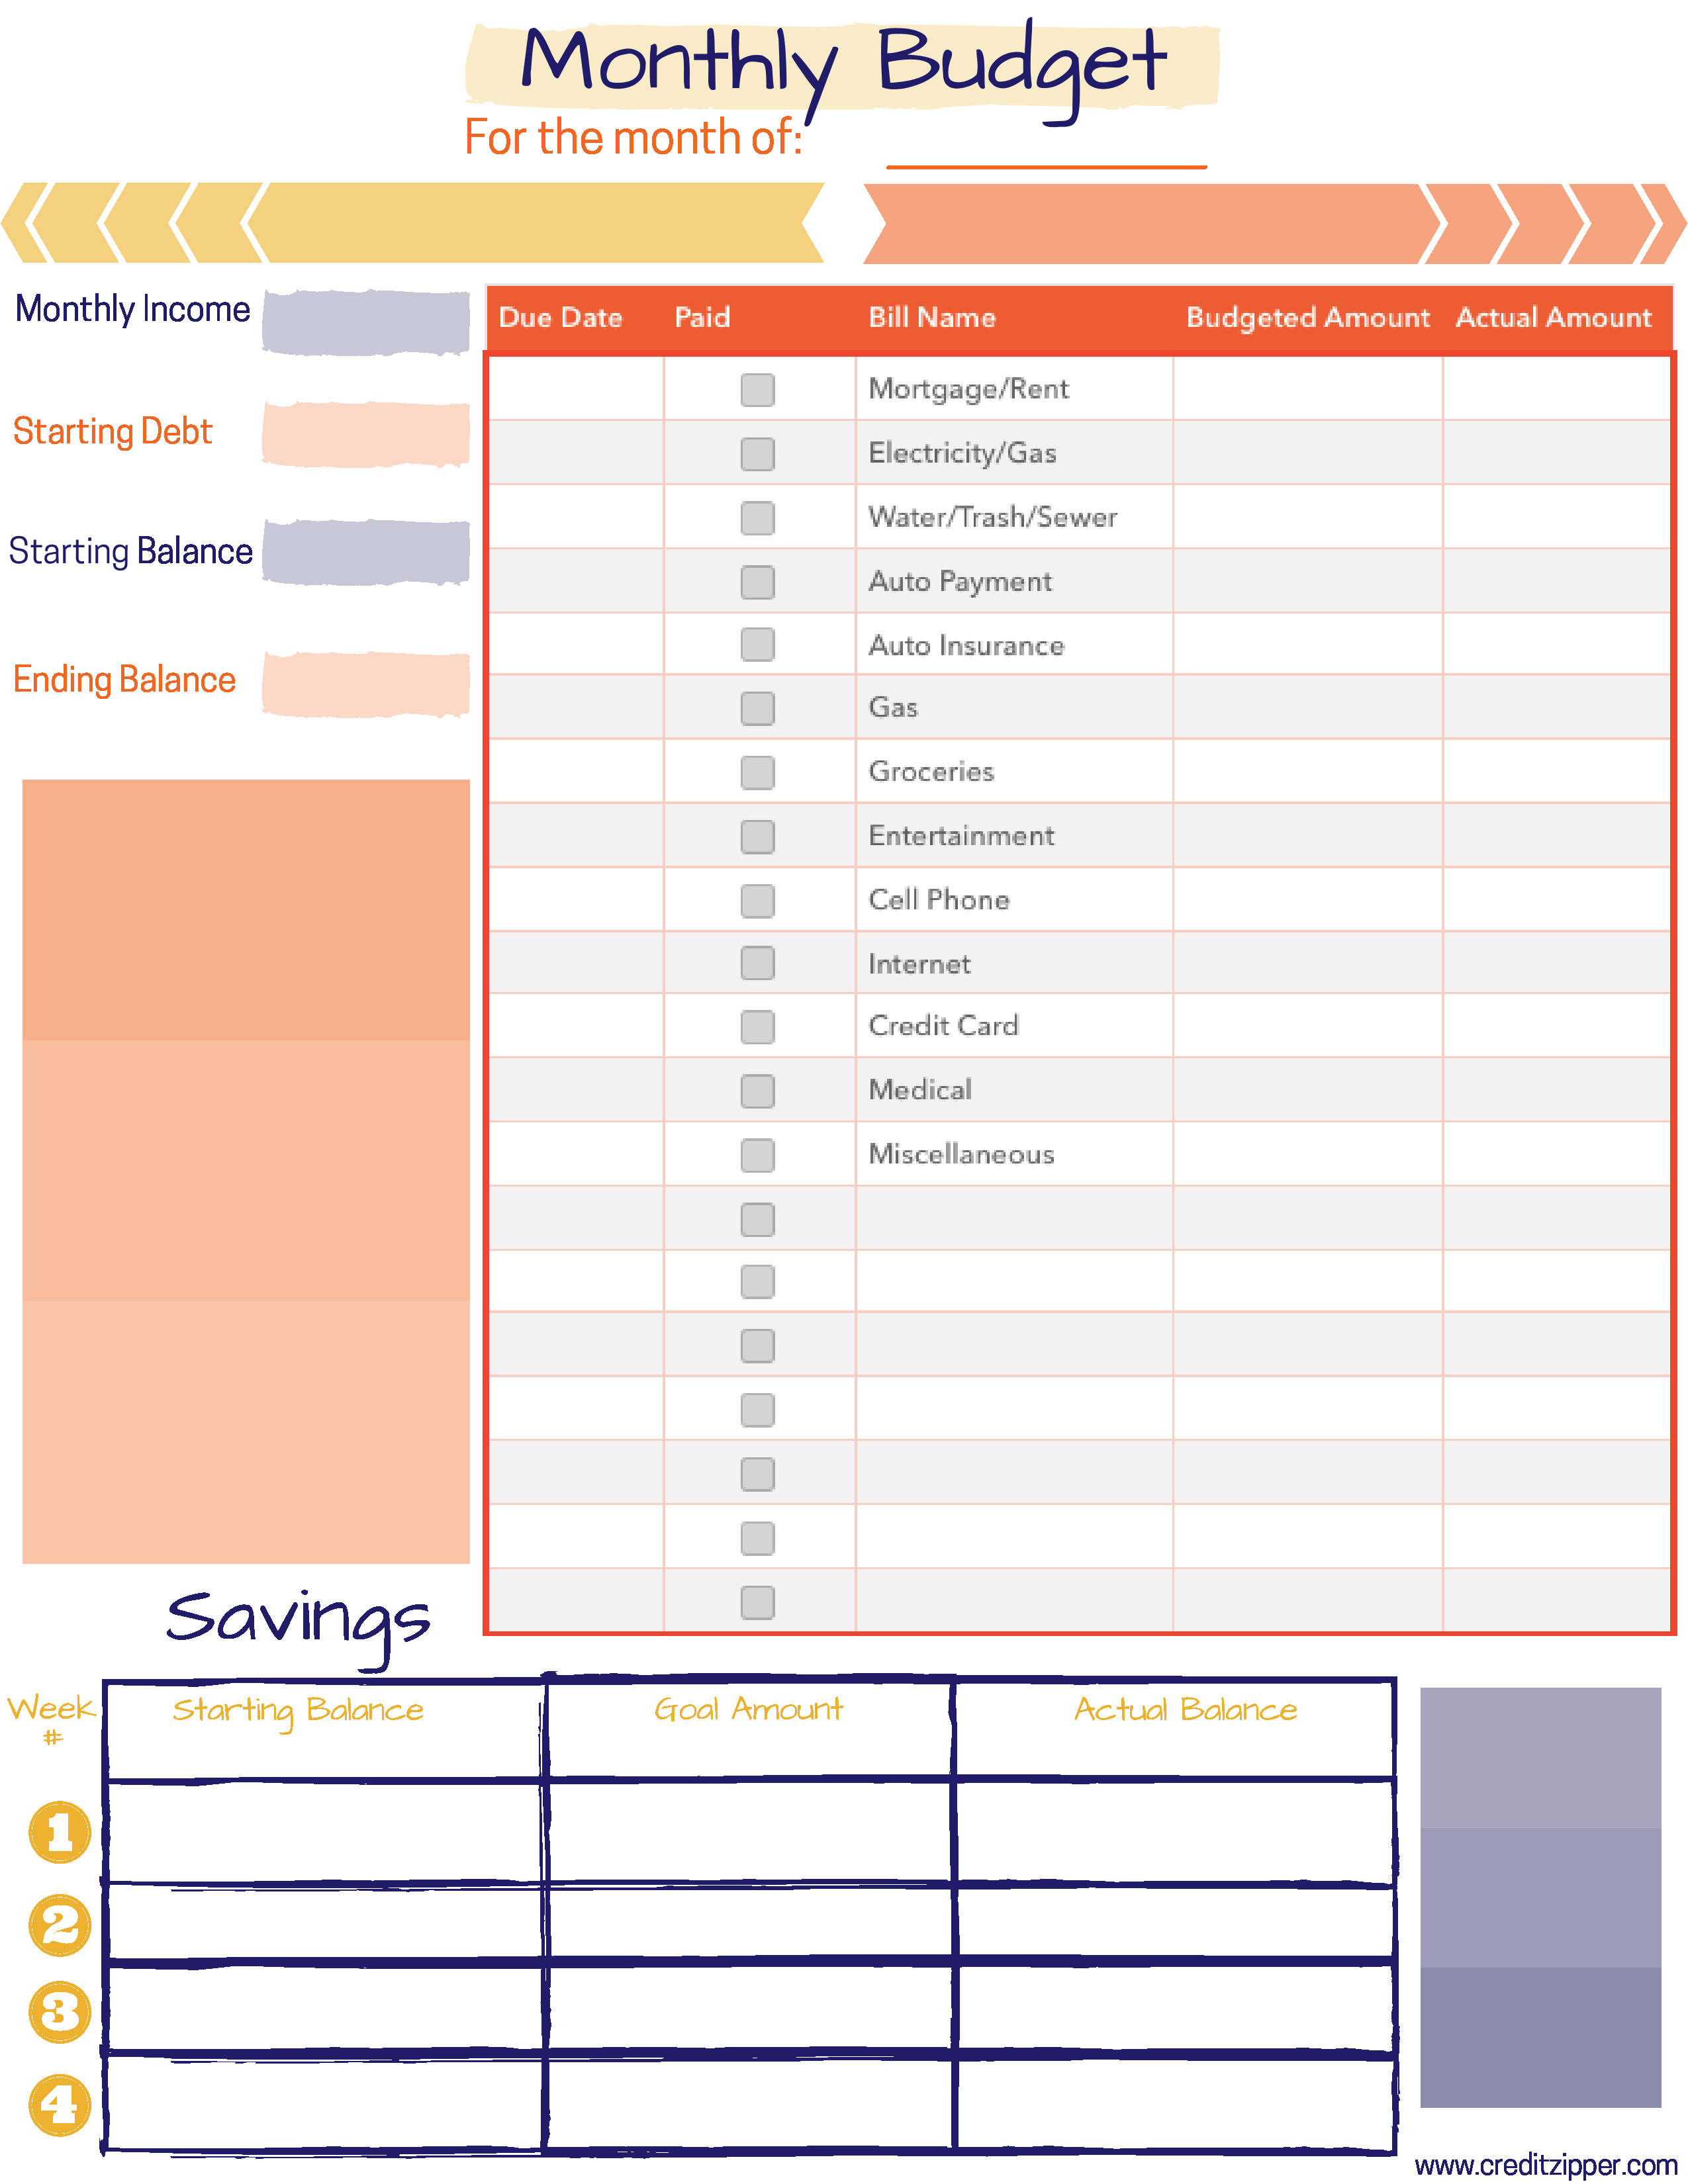 free-monthly-budget-planner-printable-credit-zipper